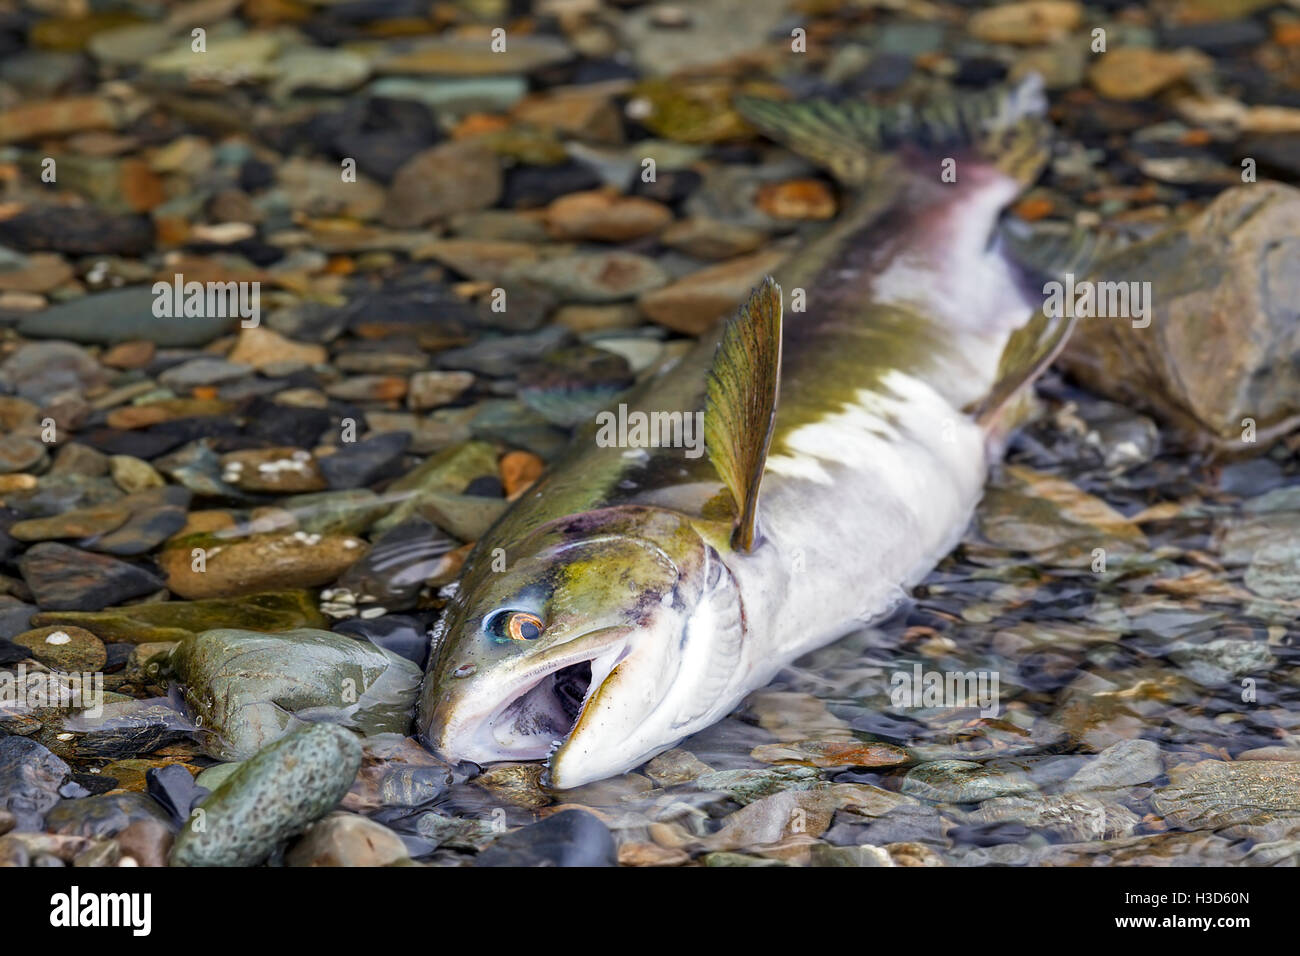 A Pink Salmon breaths its last after migrating from the Pacific Ocean to an Alaskan stream, Tongass National Forest, Alaska Stock Photo